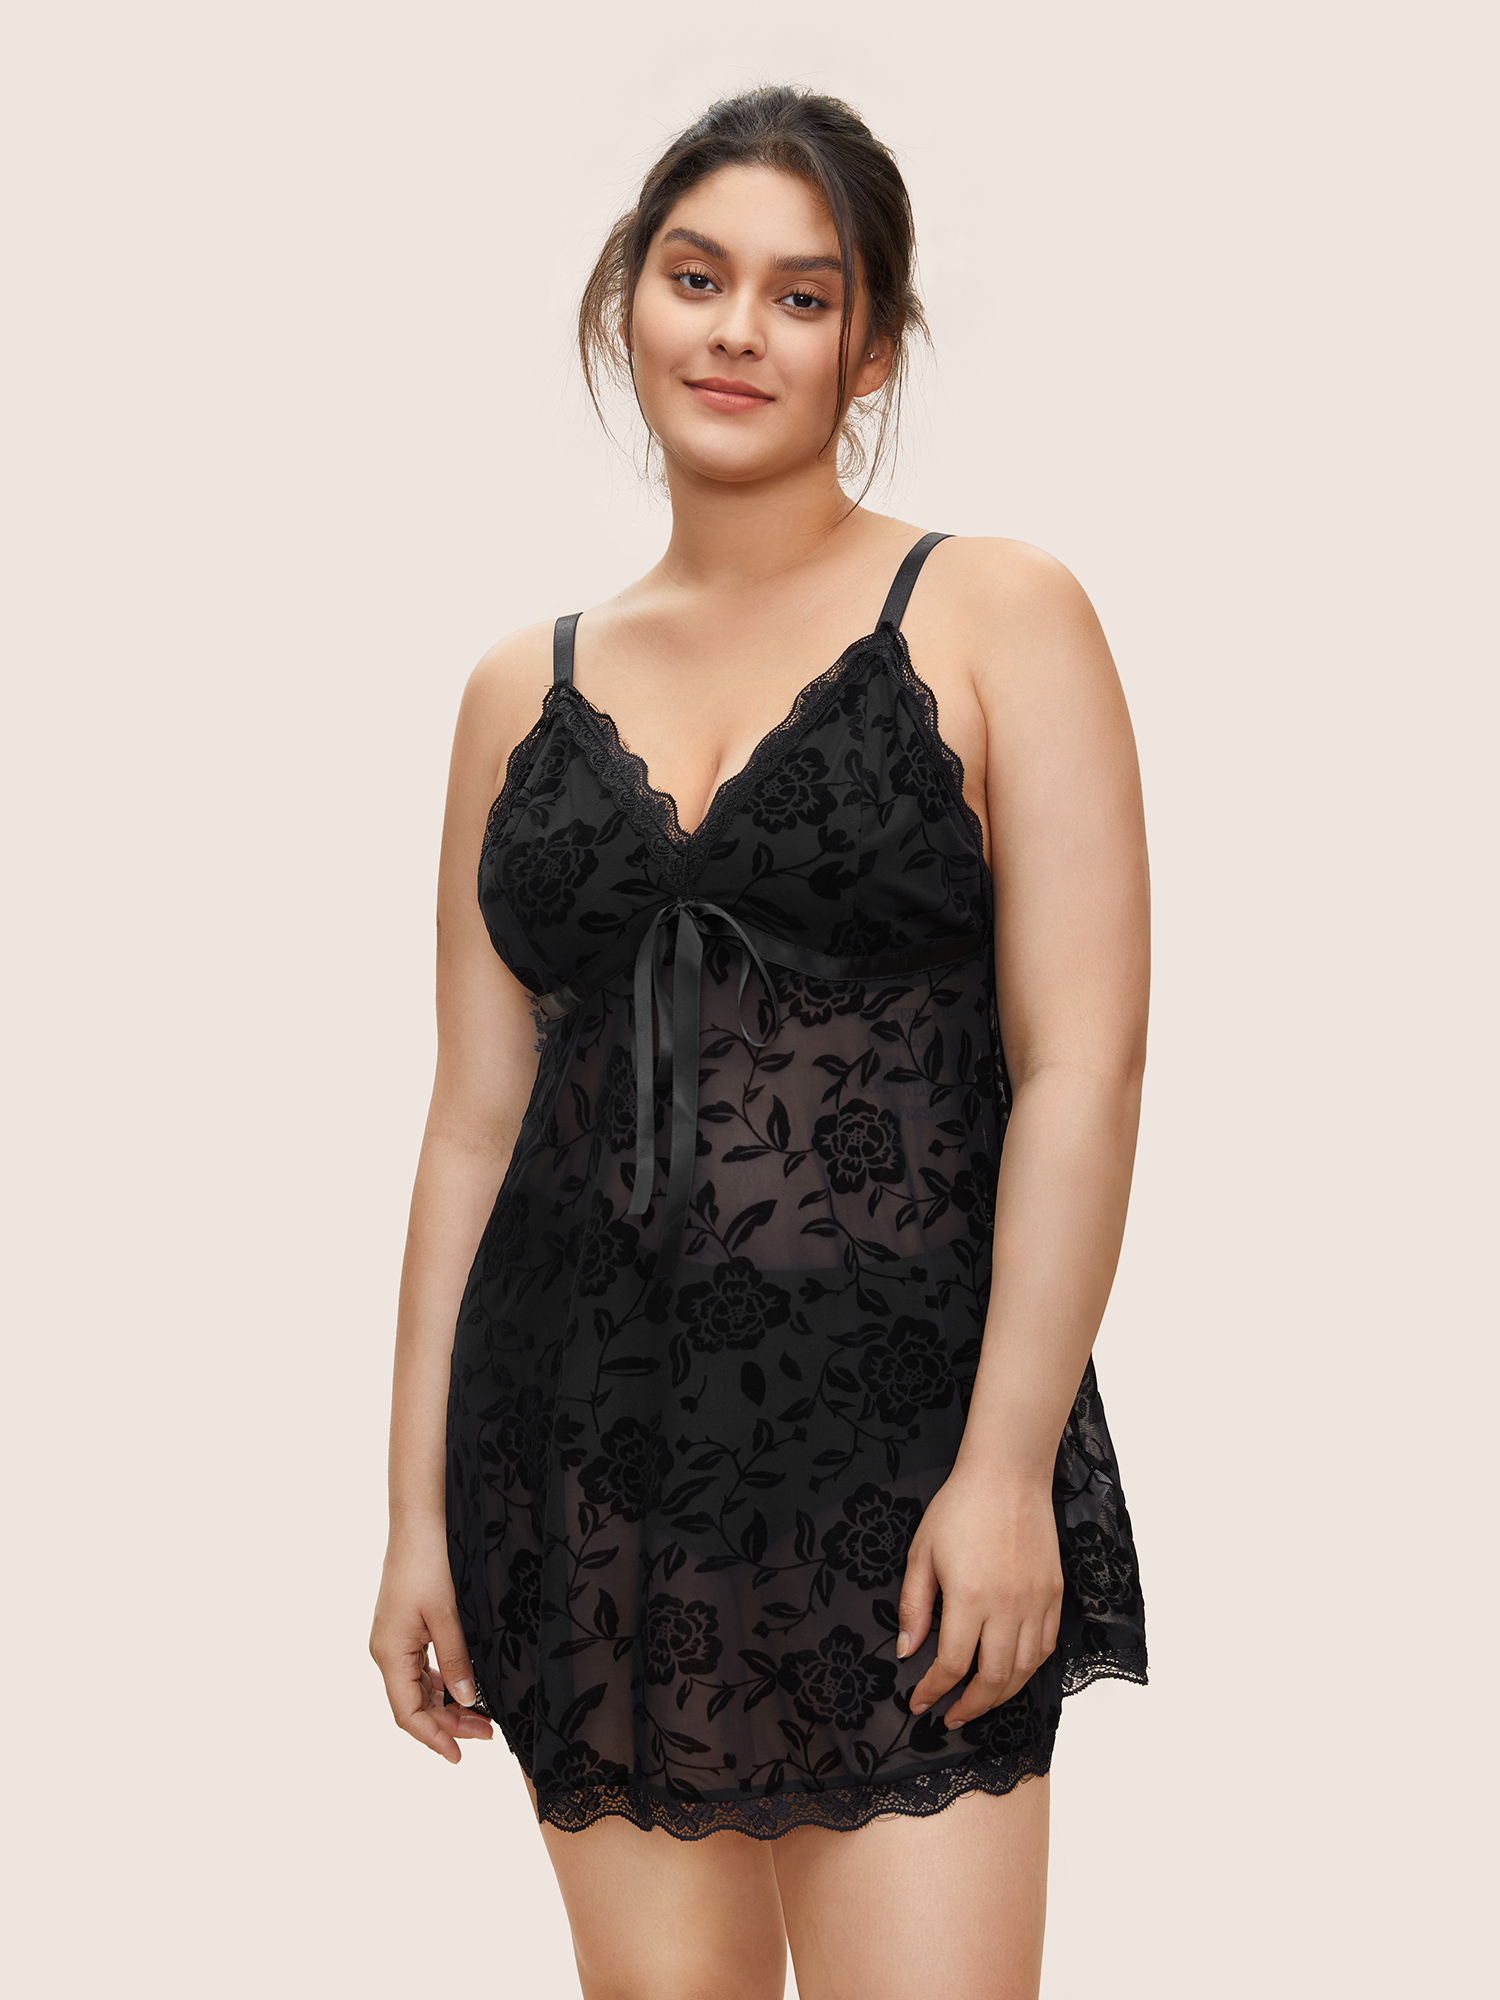 

Plus Size Silhouette Floral Print Lace Panel Bowknot Sleep Dress Black Sleeveless V-neck Lounge Everyday  Bloomchic